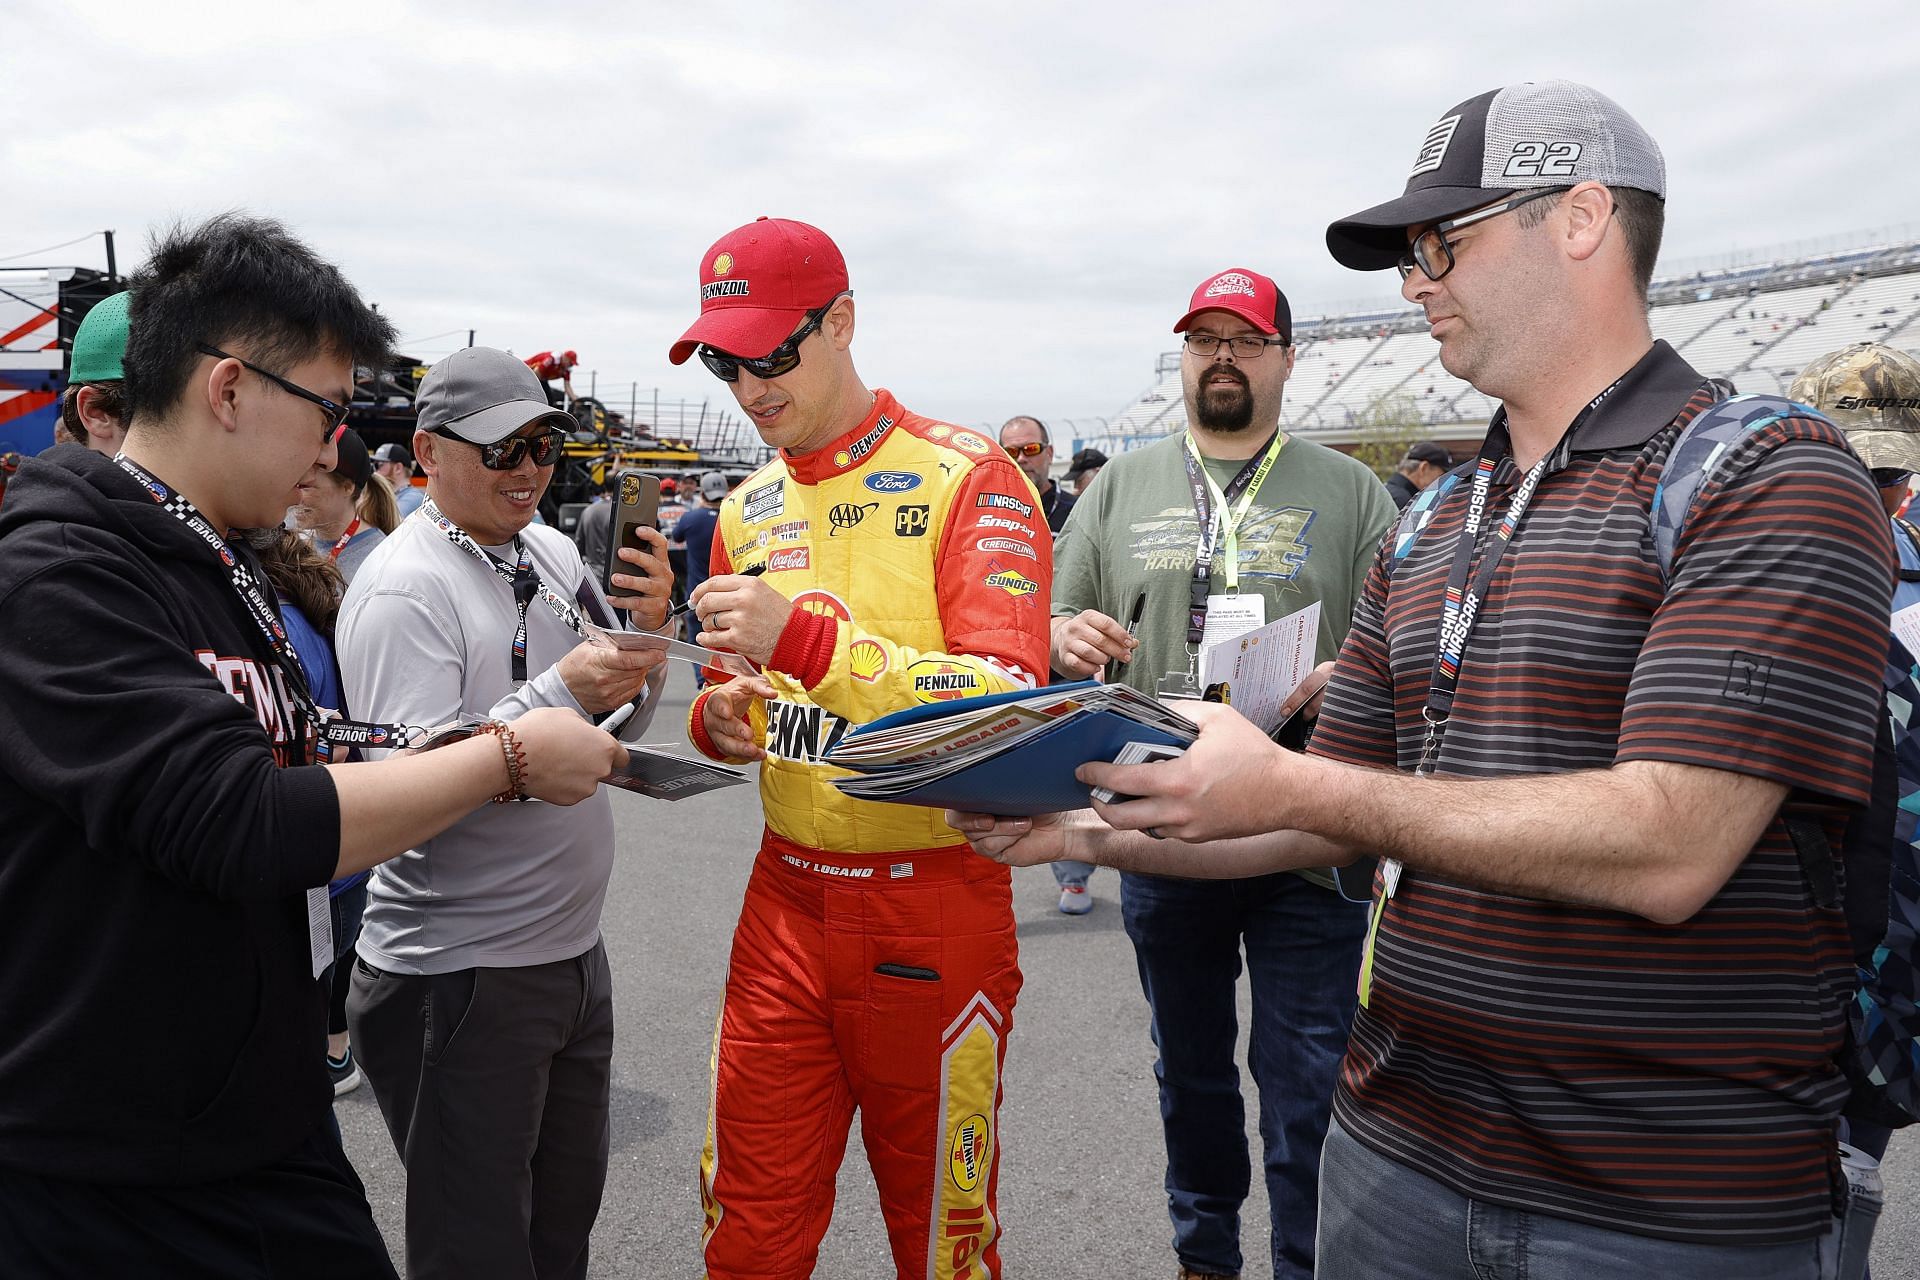 Joey Logano signs autographs for fans before the 2022 NASCAR Cup Series DuraMAX Drydene 400 presented by RelaDyne at Dover Motor Speedway in Dover, Delaware. (Photo by Tim Nwachukwu/Getty Images)